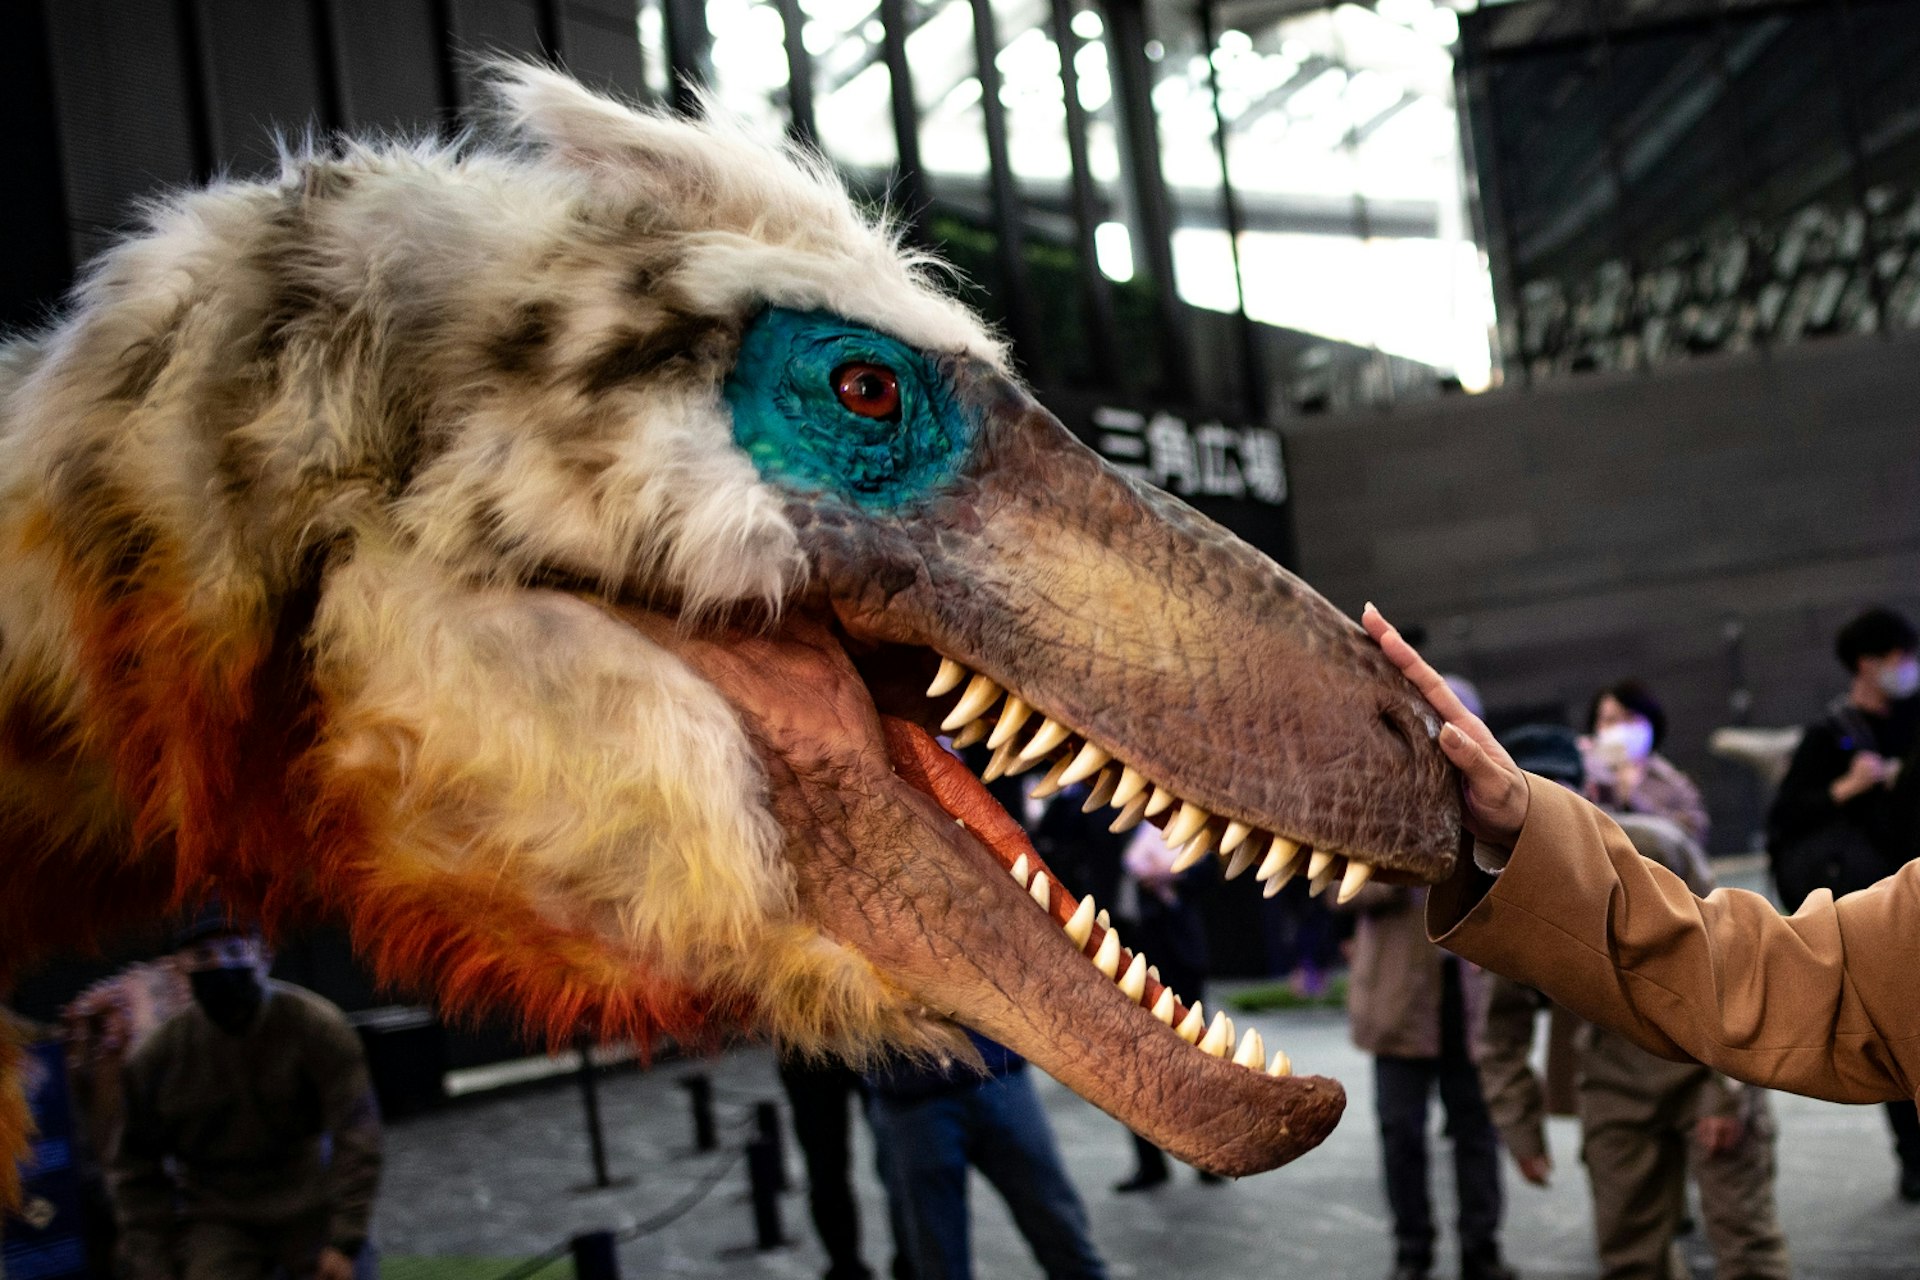 A hand touches a model of a Utahraptor at an exhibition in Tokyo